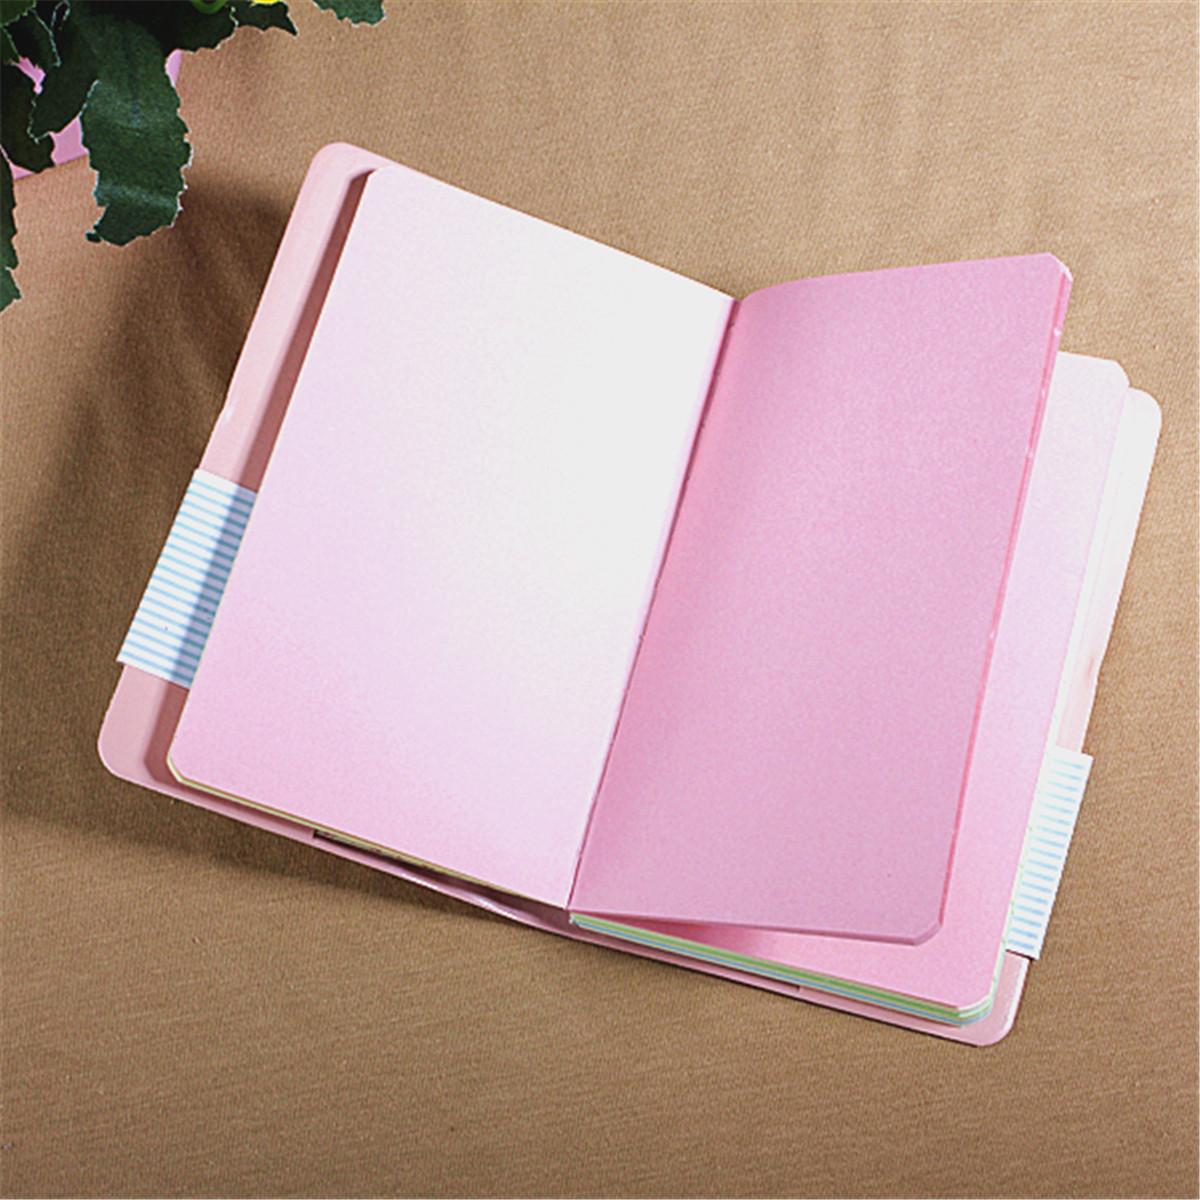 Candy-Colors-Charming-Smiley-Paper-Diary-Notebook-Memo-Book-leather-Note-Pads-Stationery-Pocketbook-1247985-9